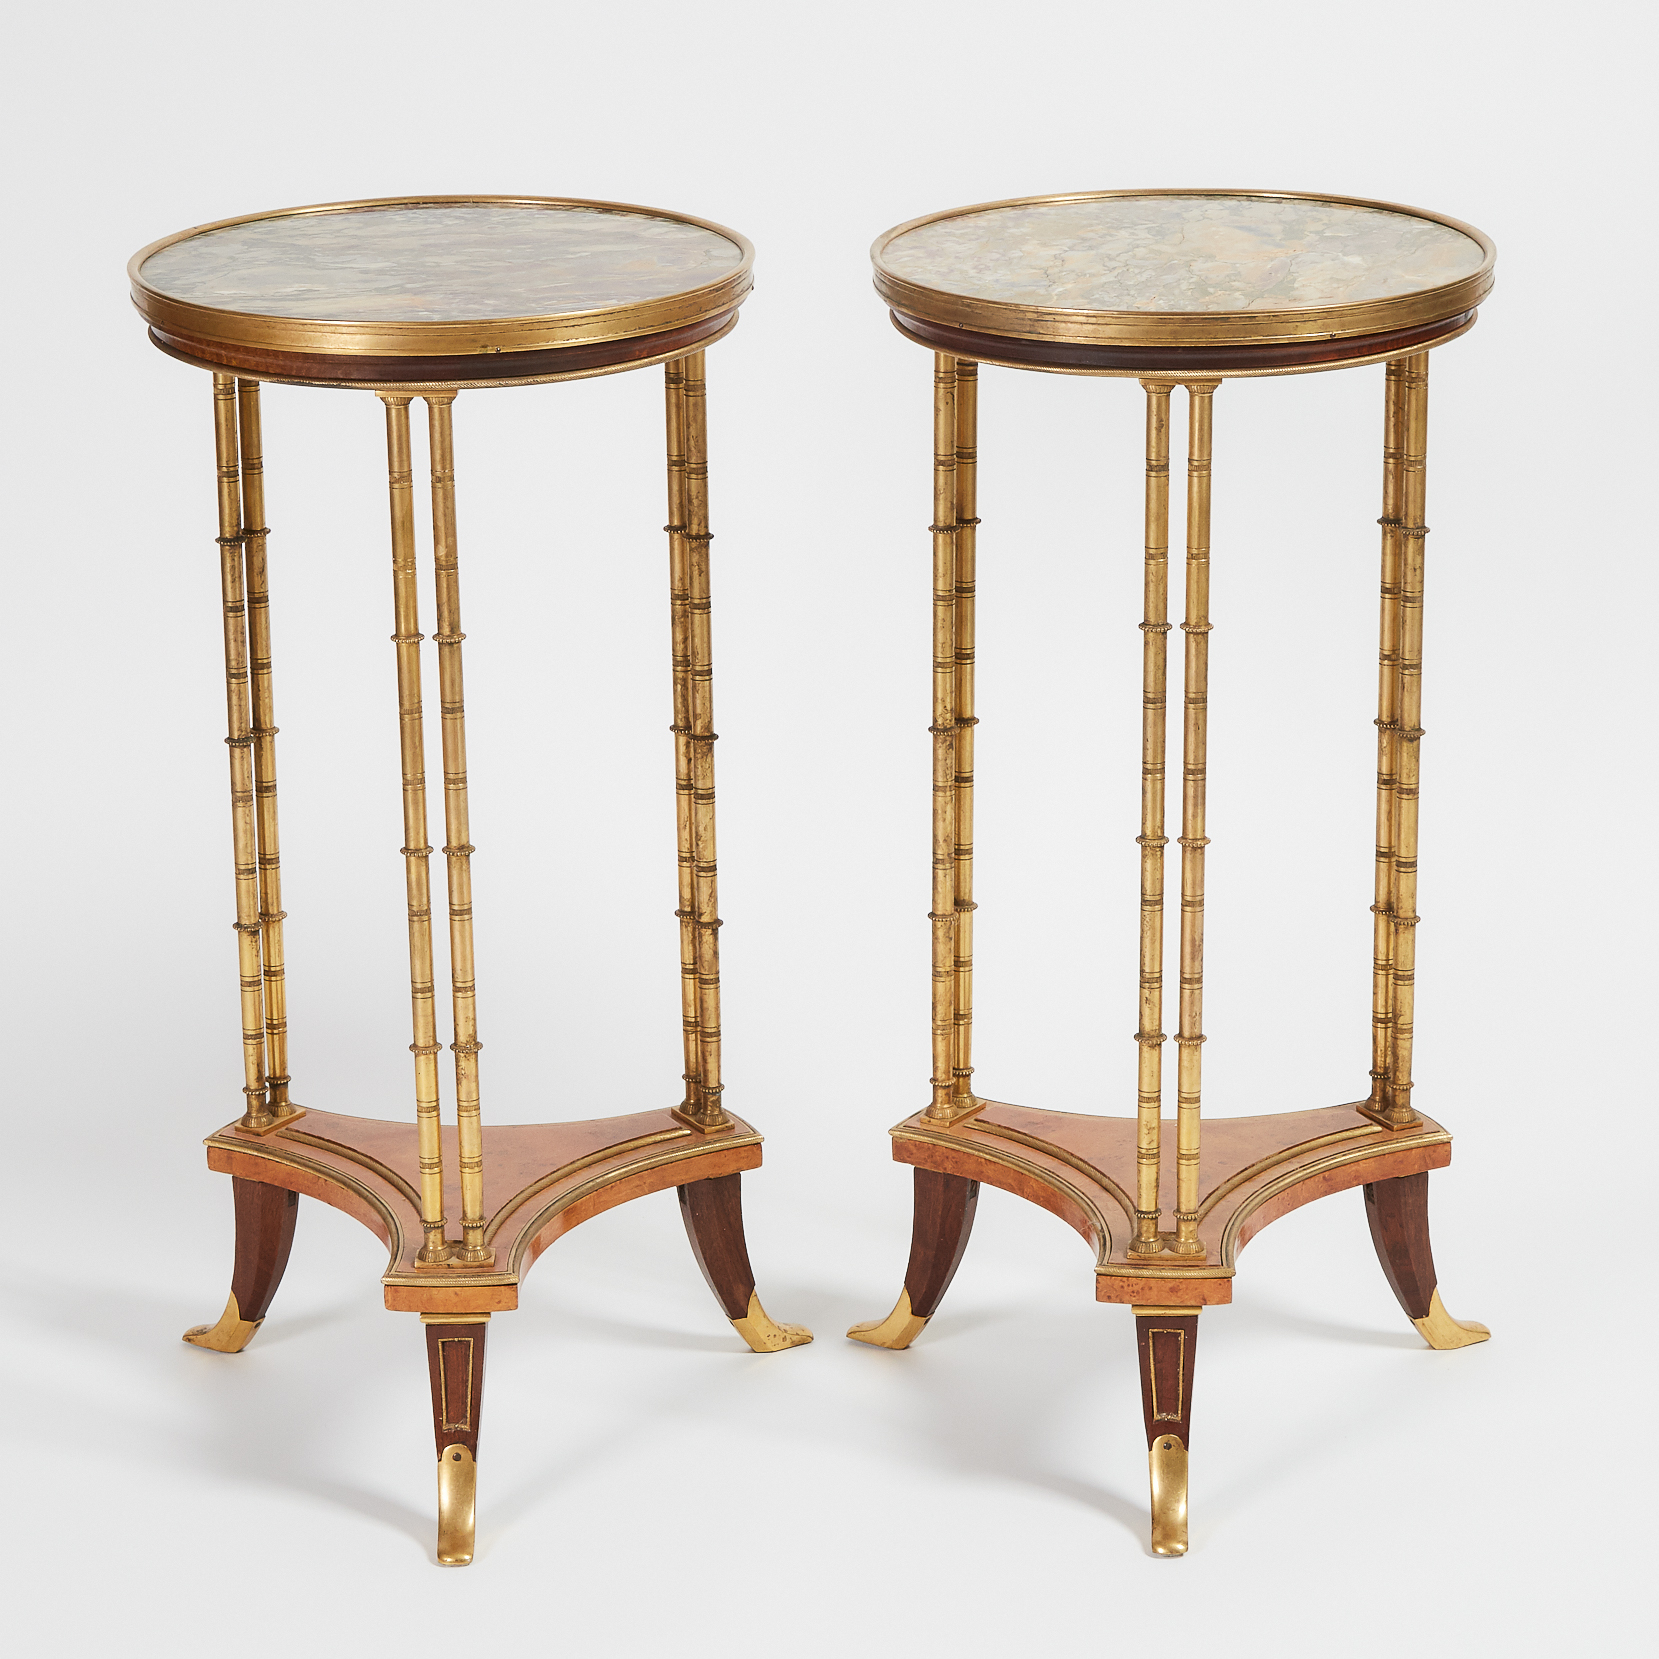 Pair of French Gilt Bronze, Burl Walnut and Rosewood Marble Topped Guéridon Tables, early 20th century